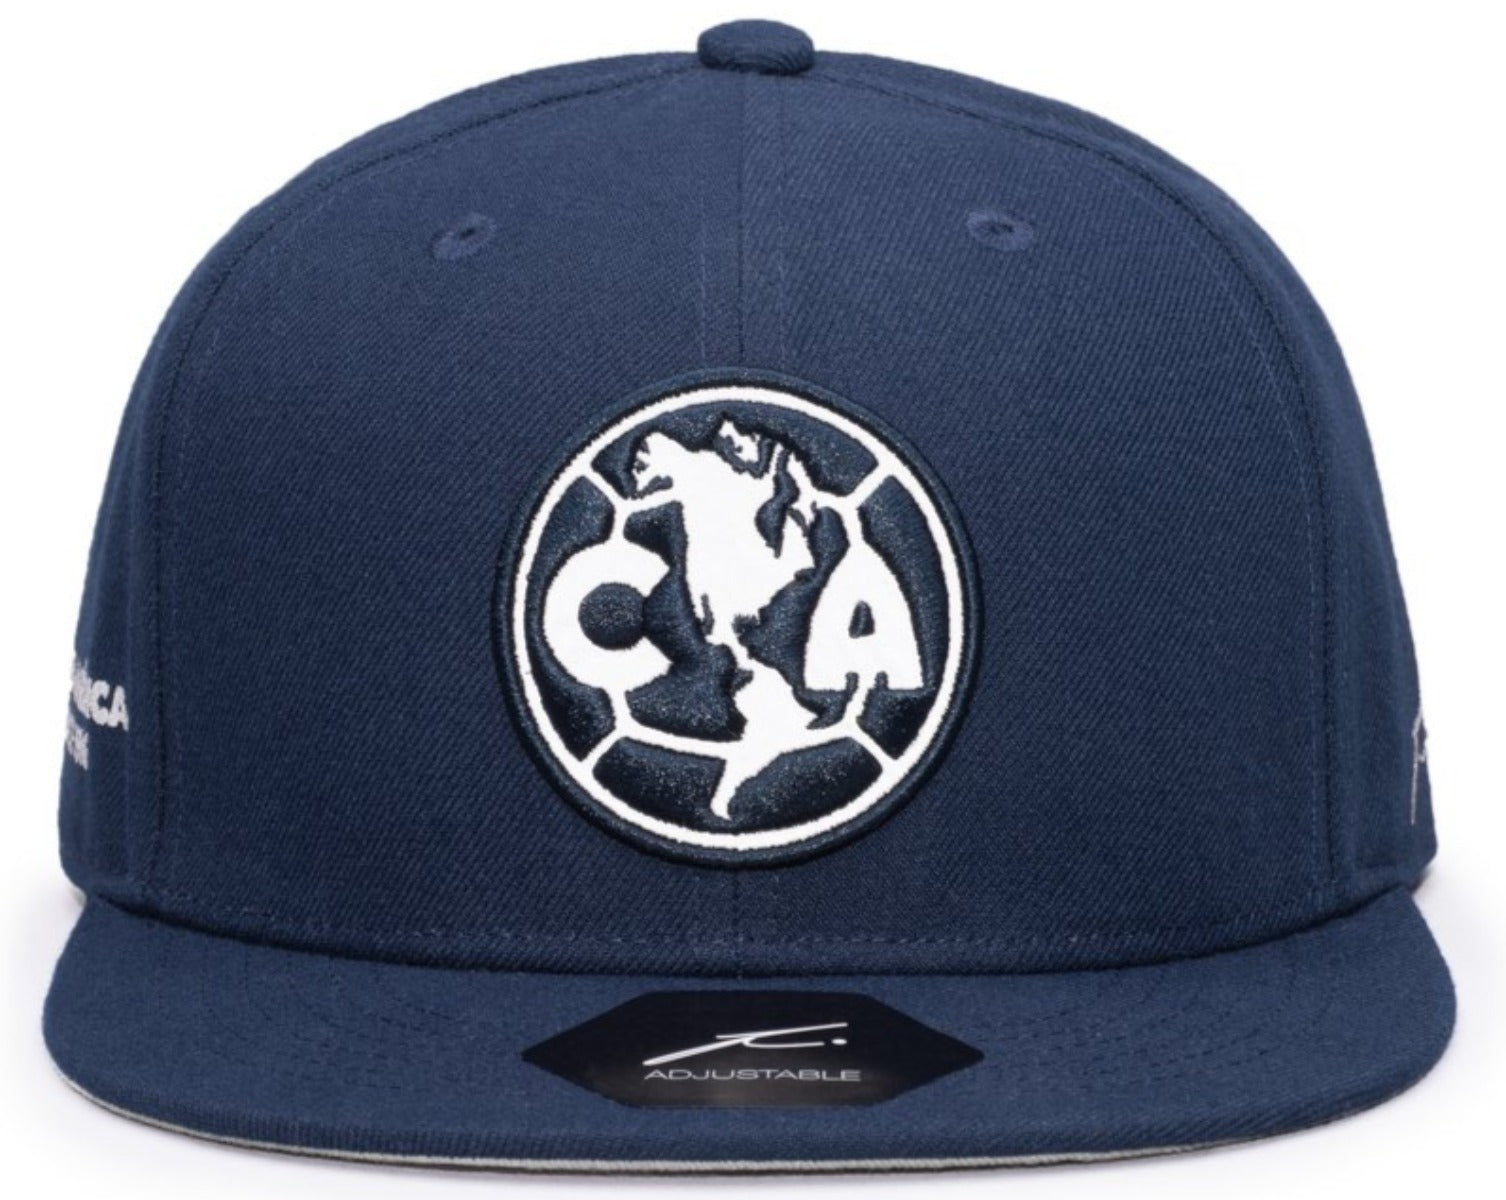 FI COLLECTIONS CLUB AMERICA BRAVEHEART SNAPBACK HAT-NAVY/WHITE